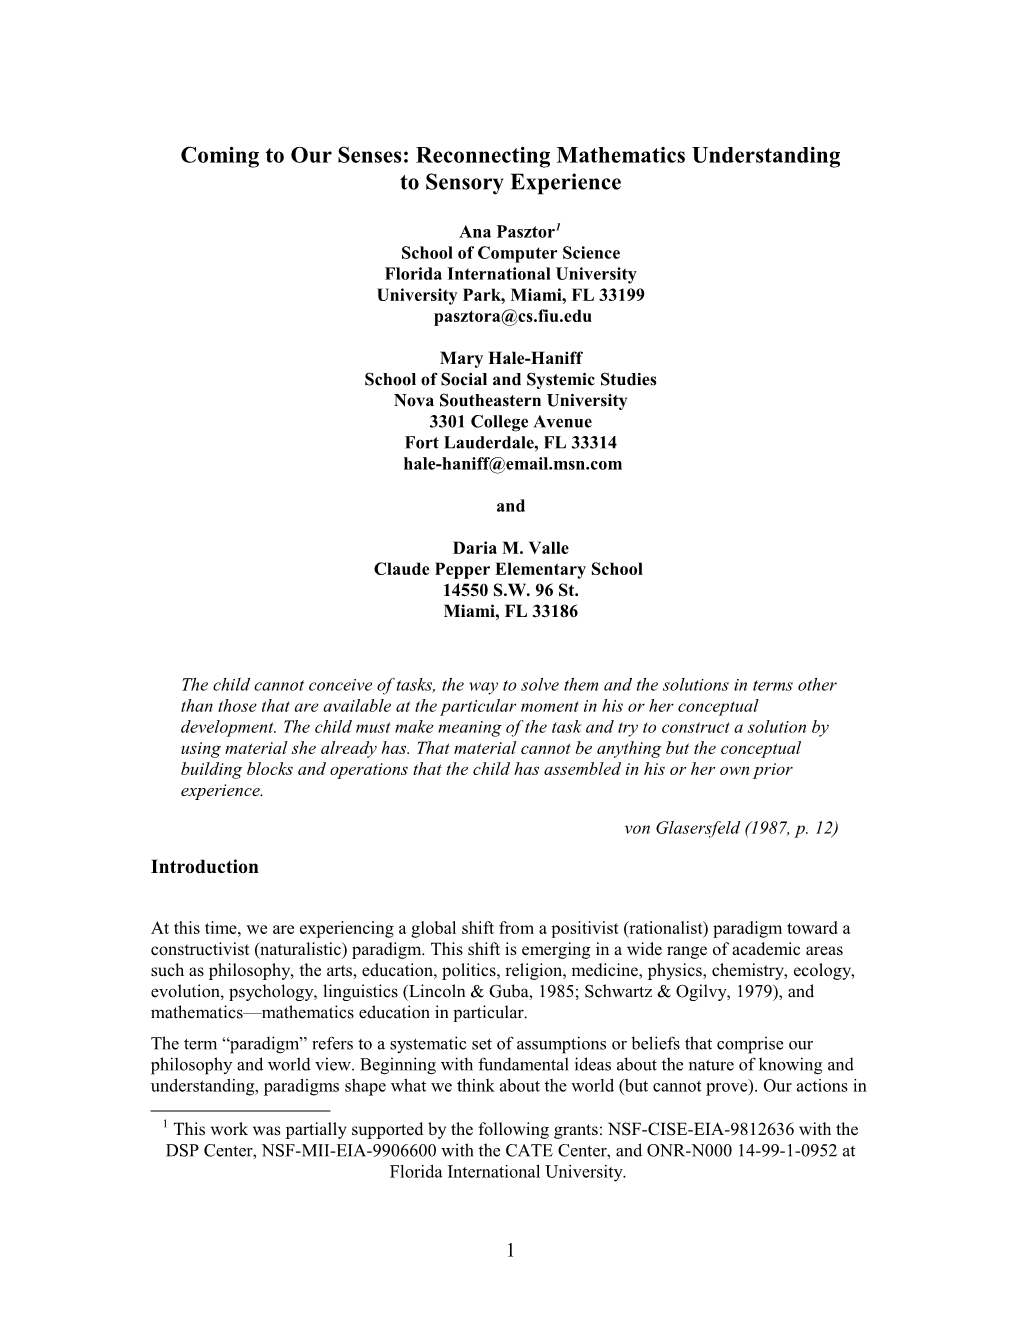 Co-Constructing the Mathematical Experience: a Constructivist Approach to Mathematics Education